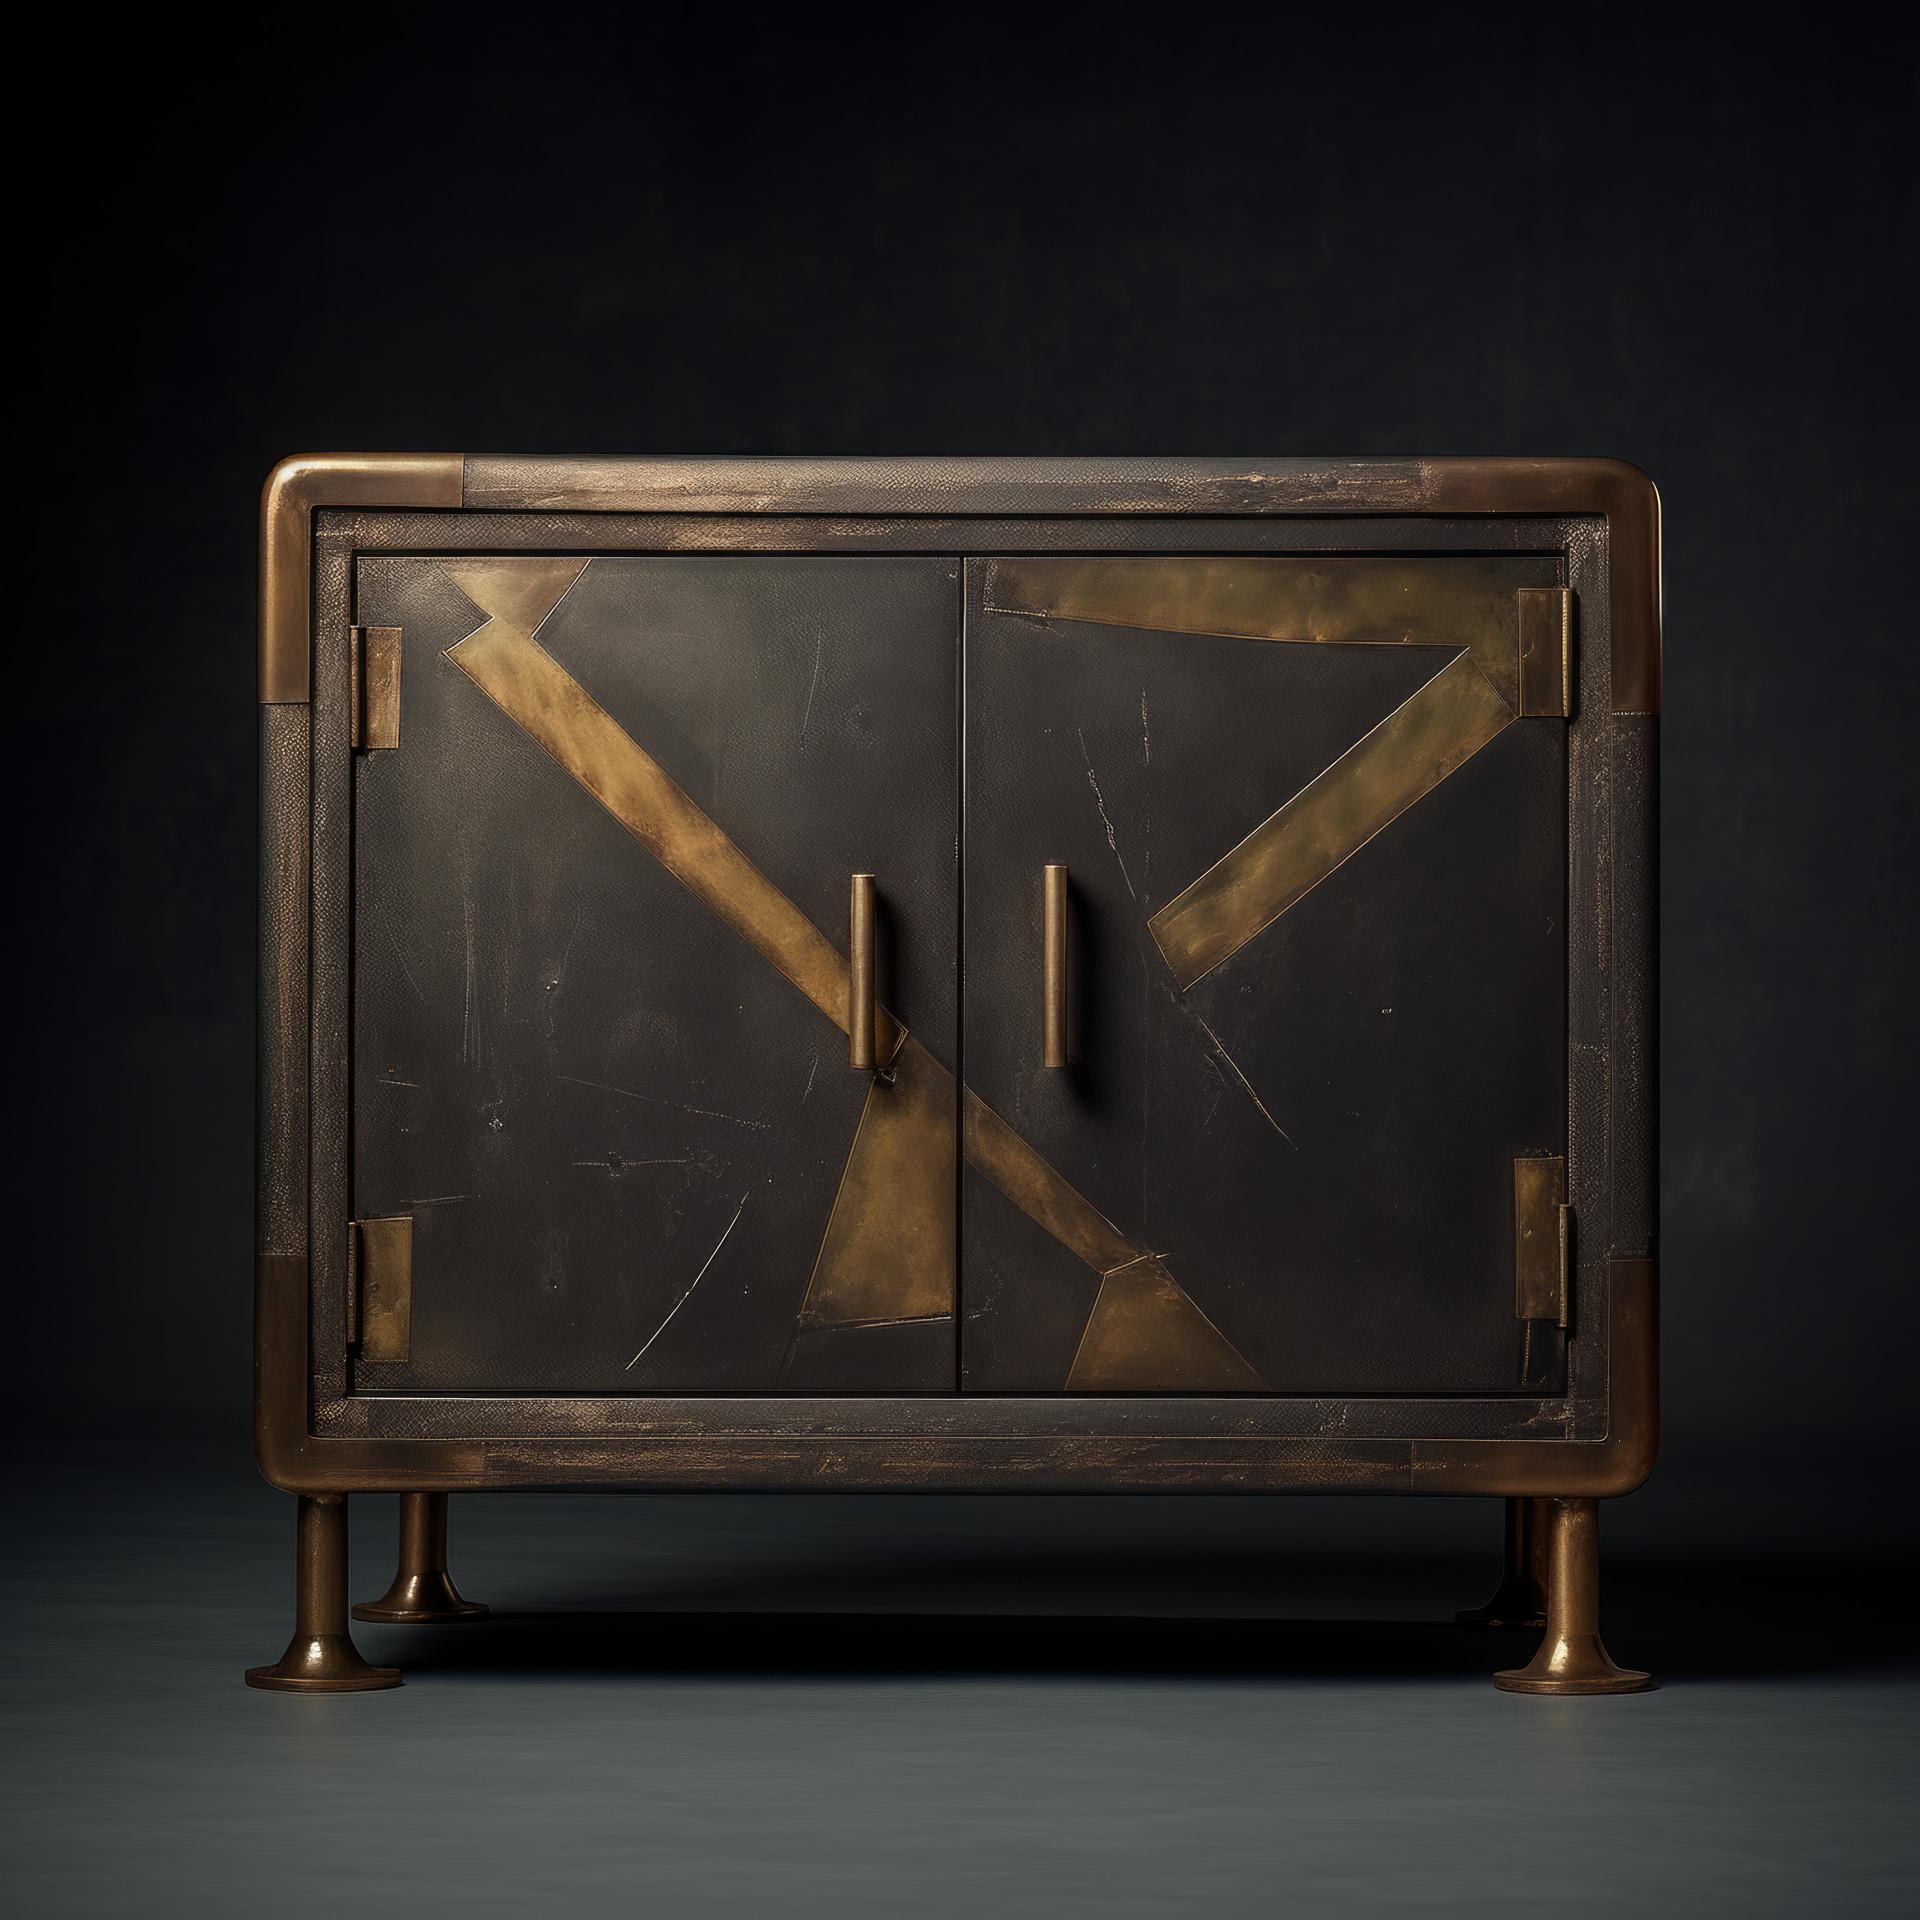 Bu Cabinet by objective OBJECT Studio
Dimensions: D 86.5 x W 96.5 x H 63.5 cm 
Materials: Bronze, Brass.

objective OBJECT
an embodiment of our architectural ethos.

We represent an unwavering dedication to truth, impartiality, and the profound